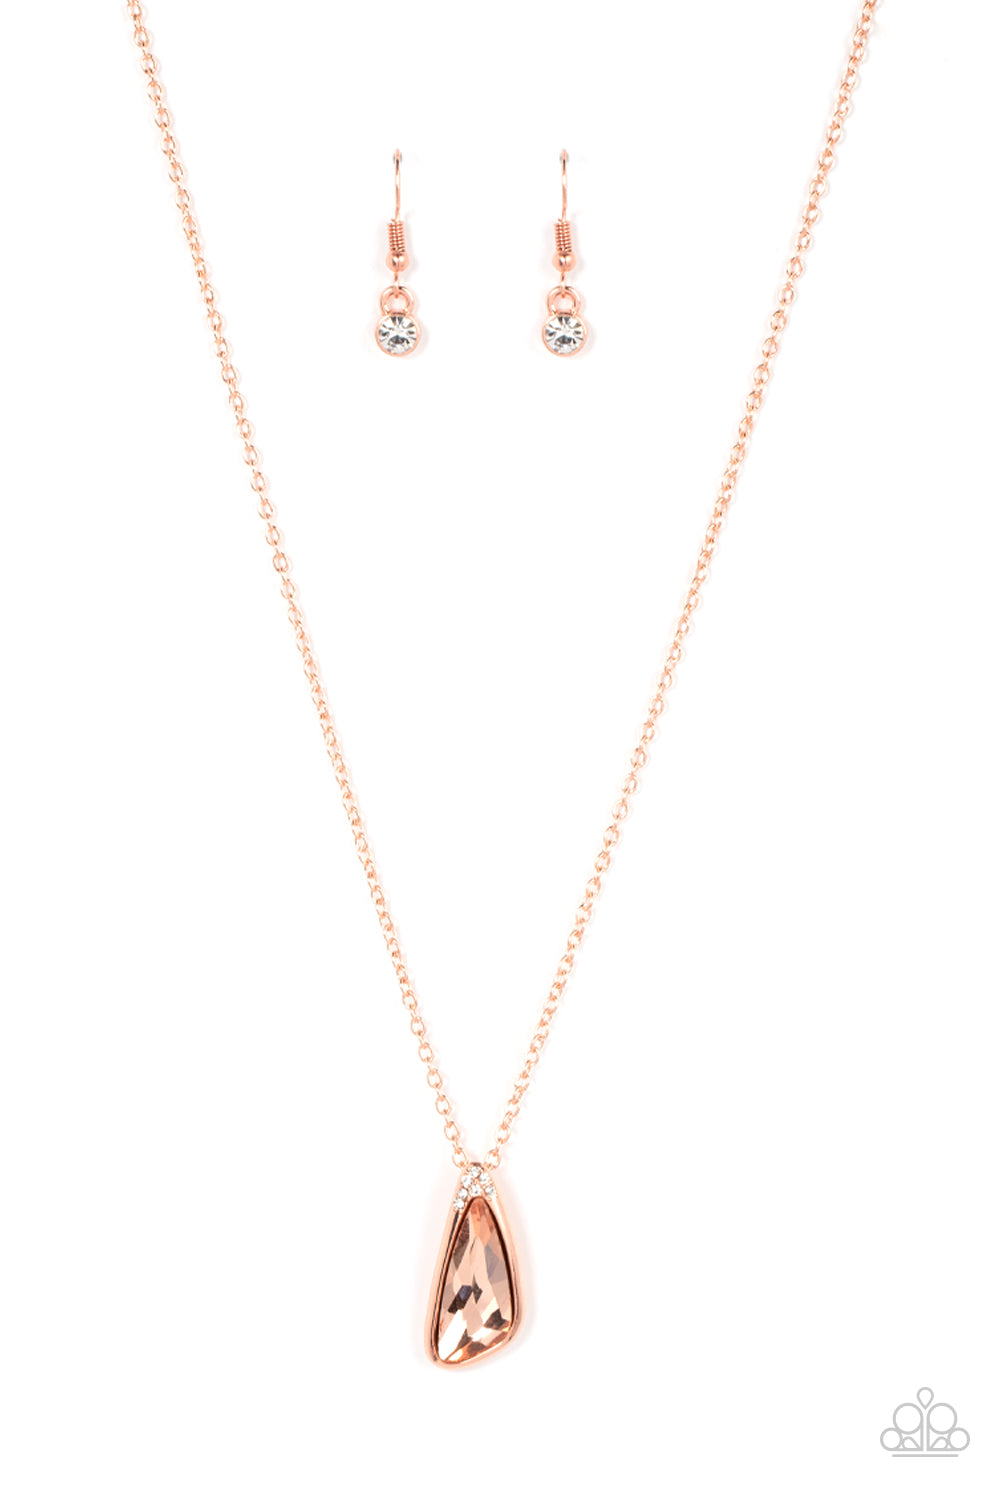 Envious Extravagance Paparazzi Accessories Necklace with Earrings Copper